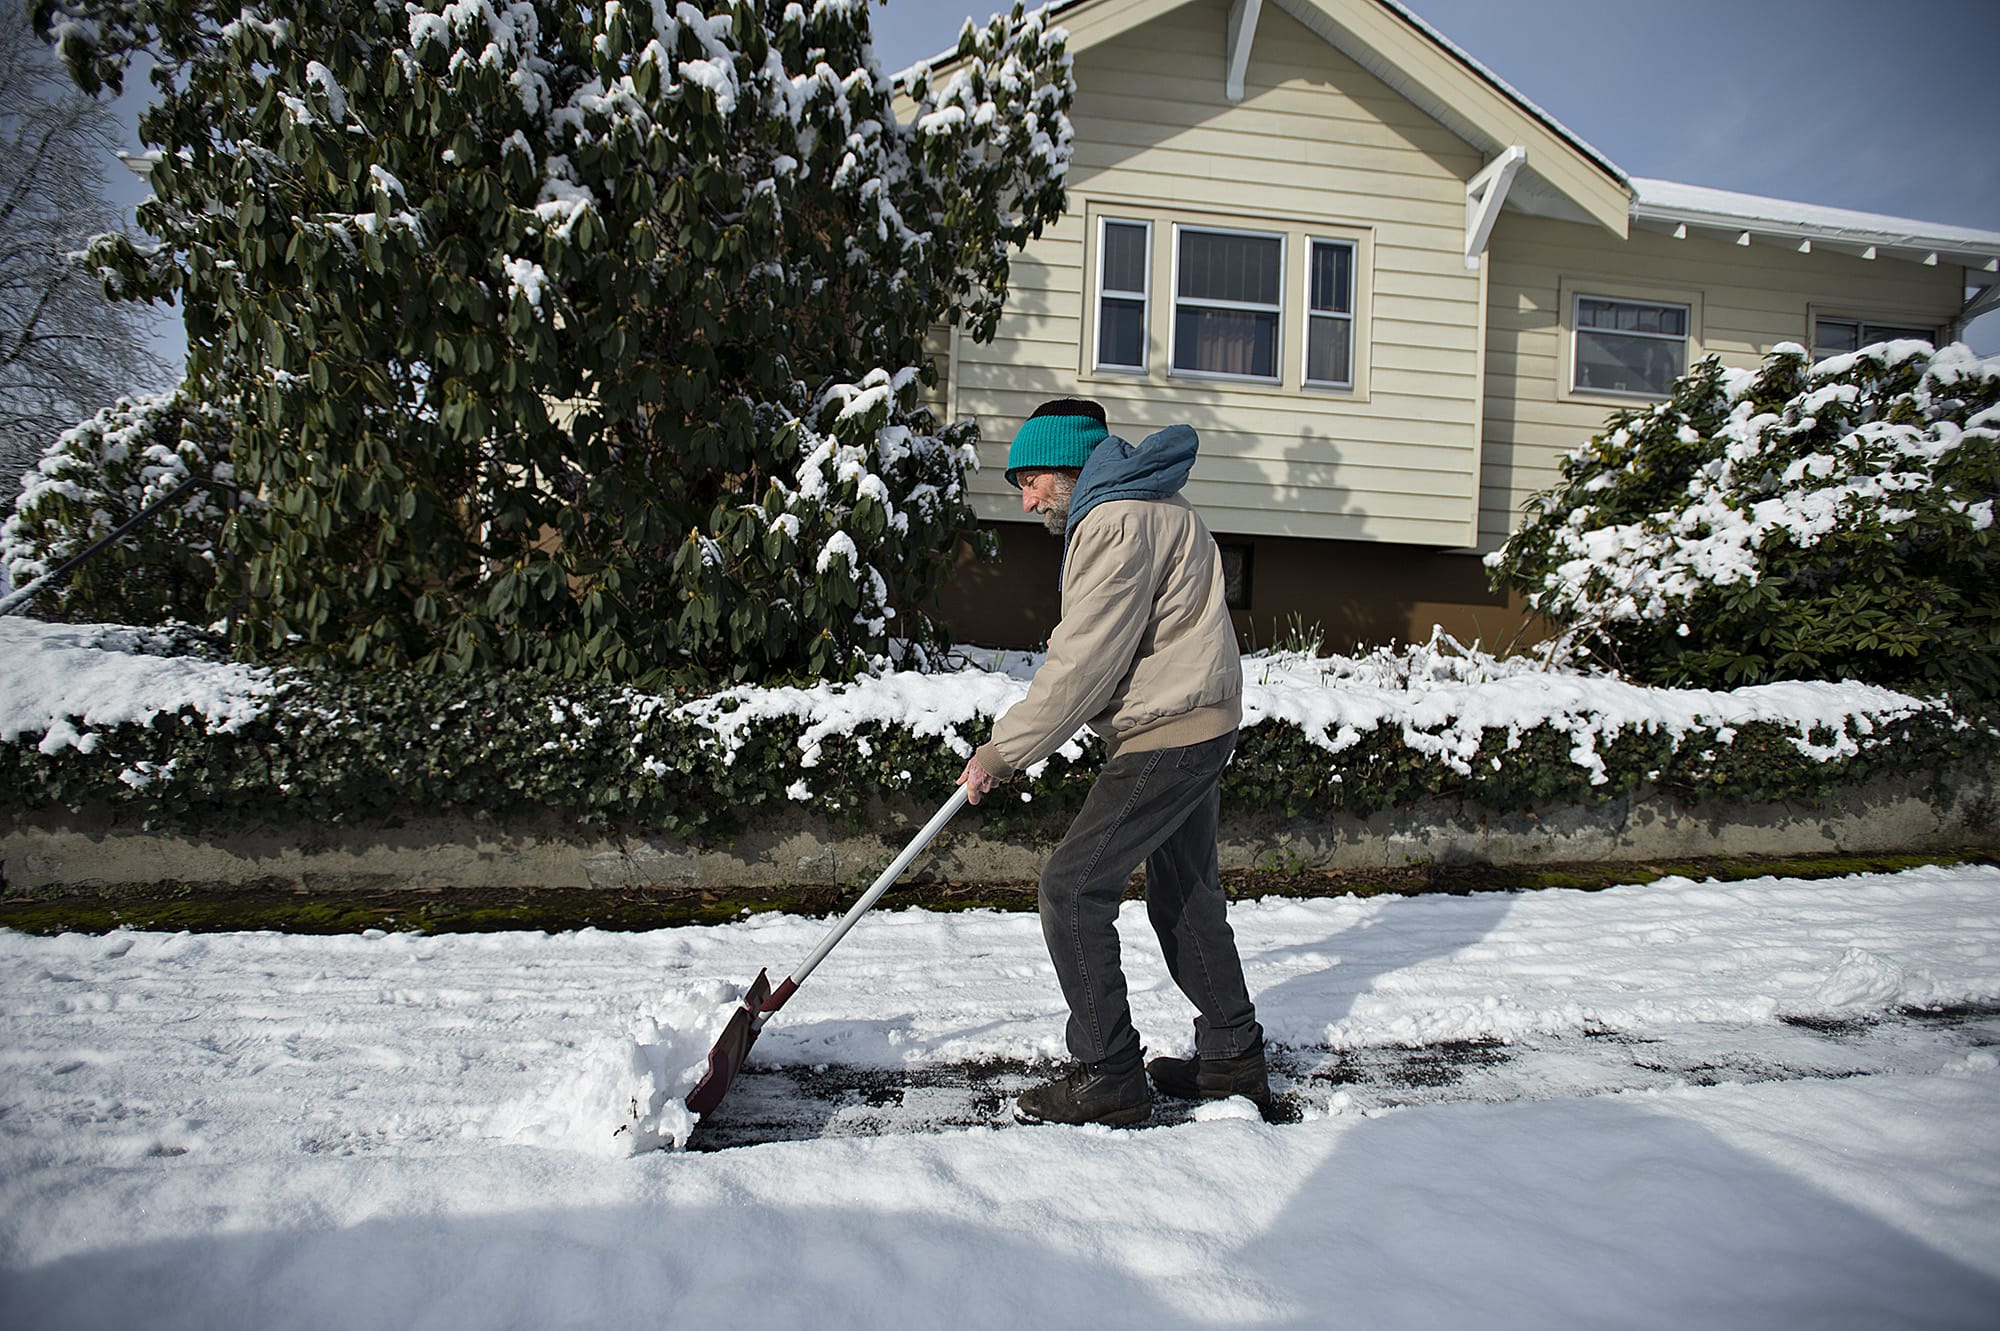 John Lemley of Vancouver lends a kind hand to a neighbor as he shovels a sidewalk in the Lincoln neighborhood Wednesday morning, Feb. 21, 2018.